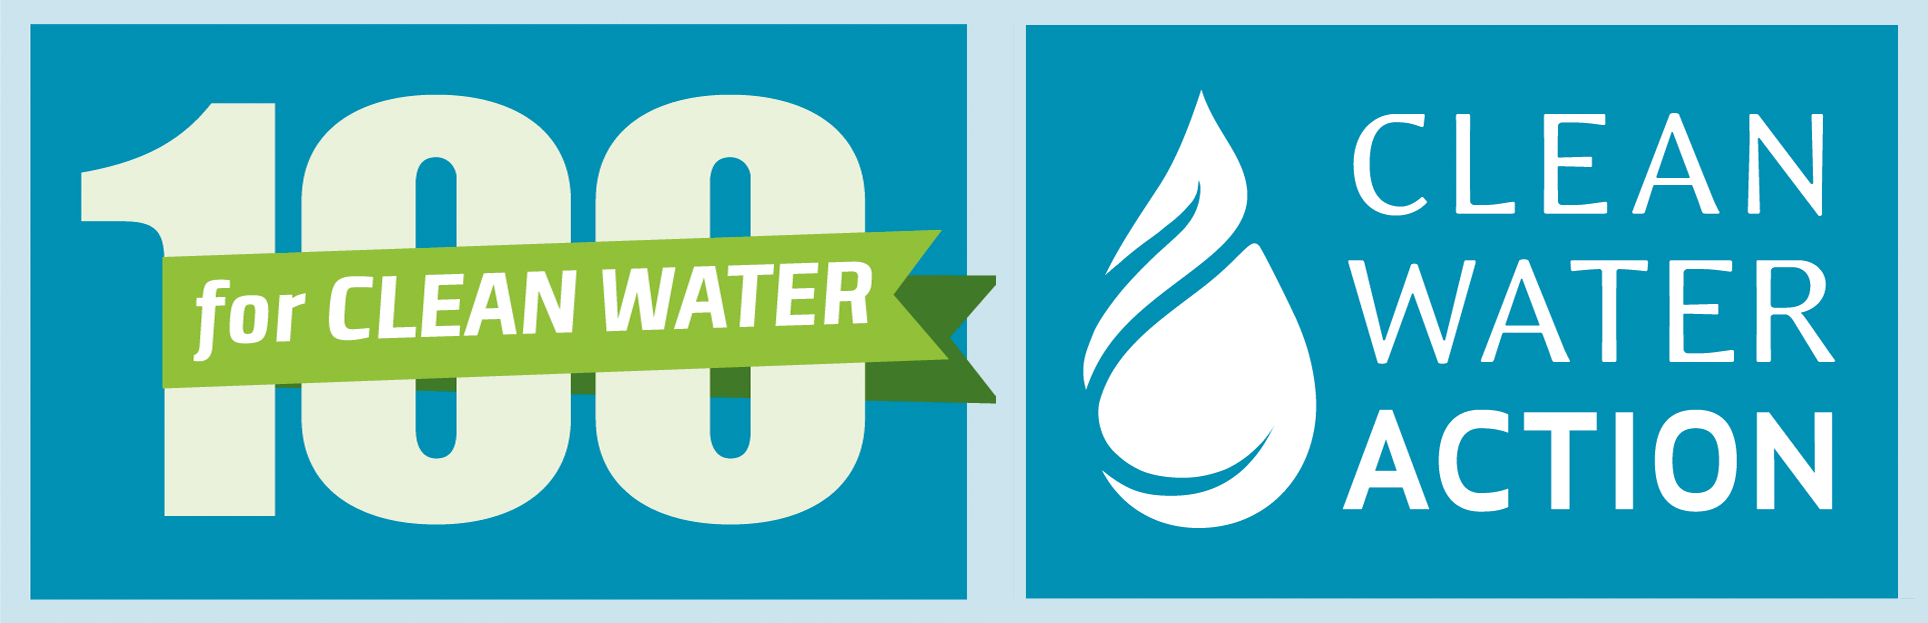 100 for Clean Water Logo